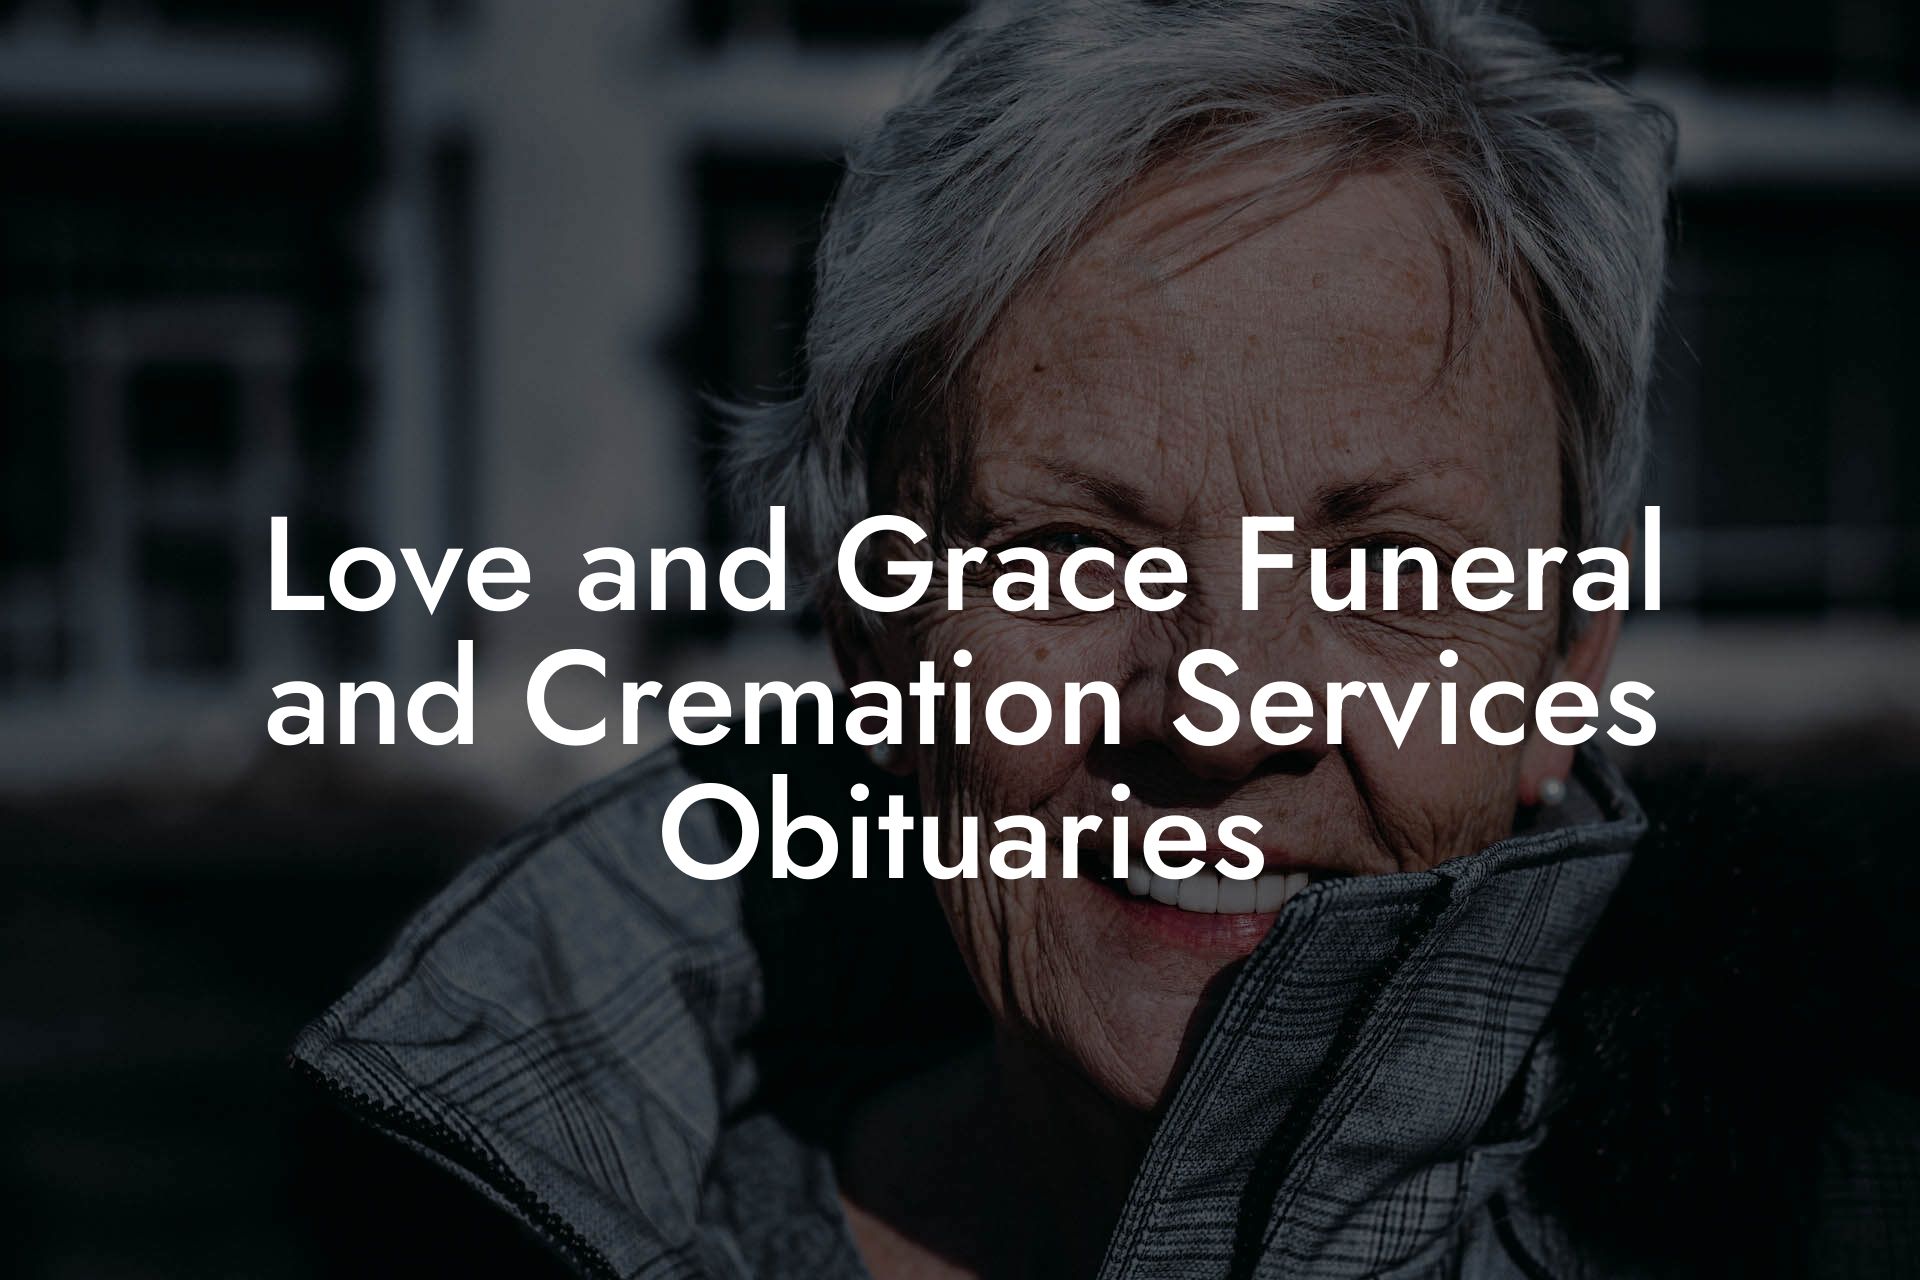 Love and Grace Funeral and Cremation Services Obituaries